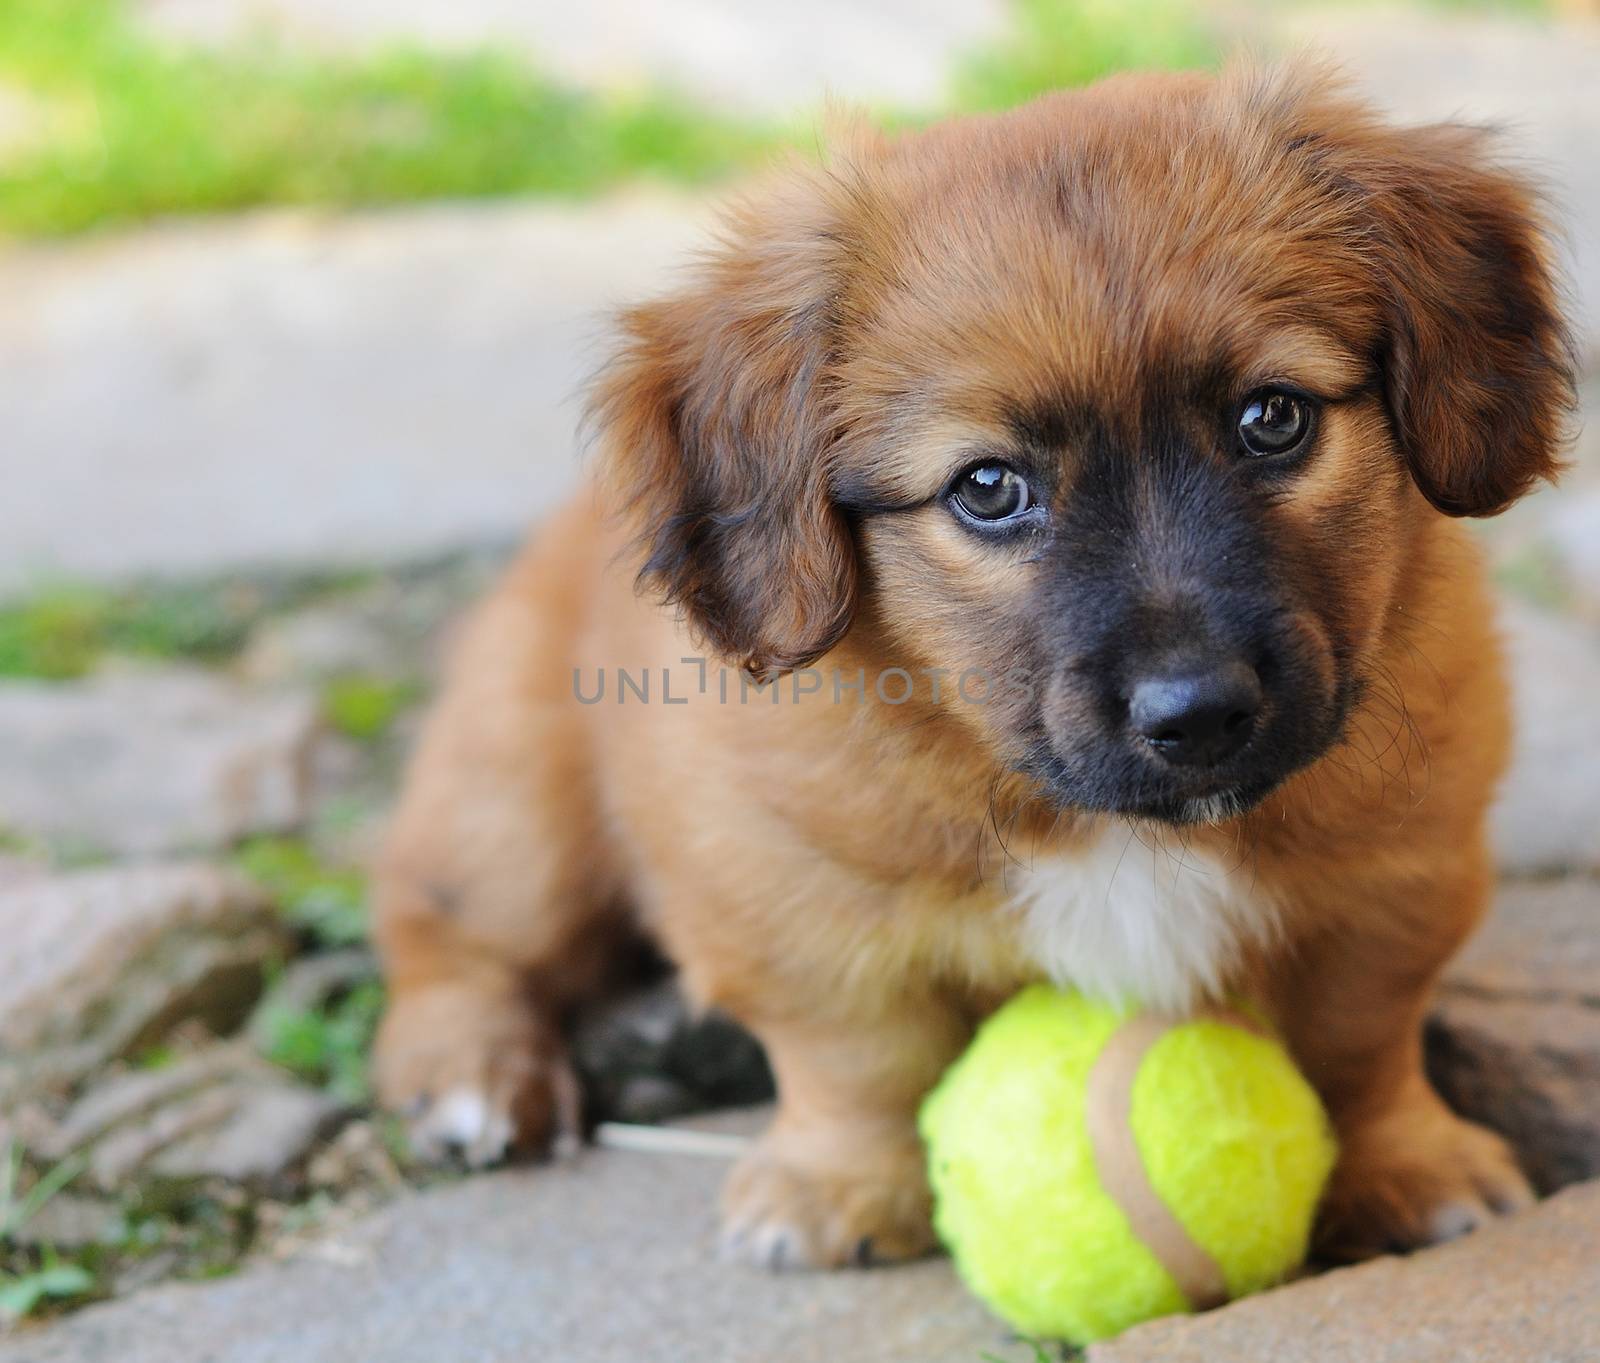 Small puppy  by hamik